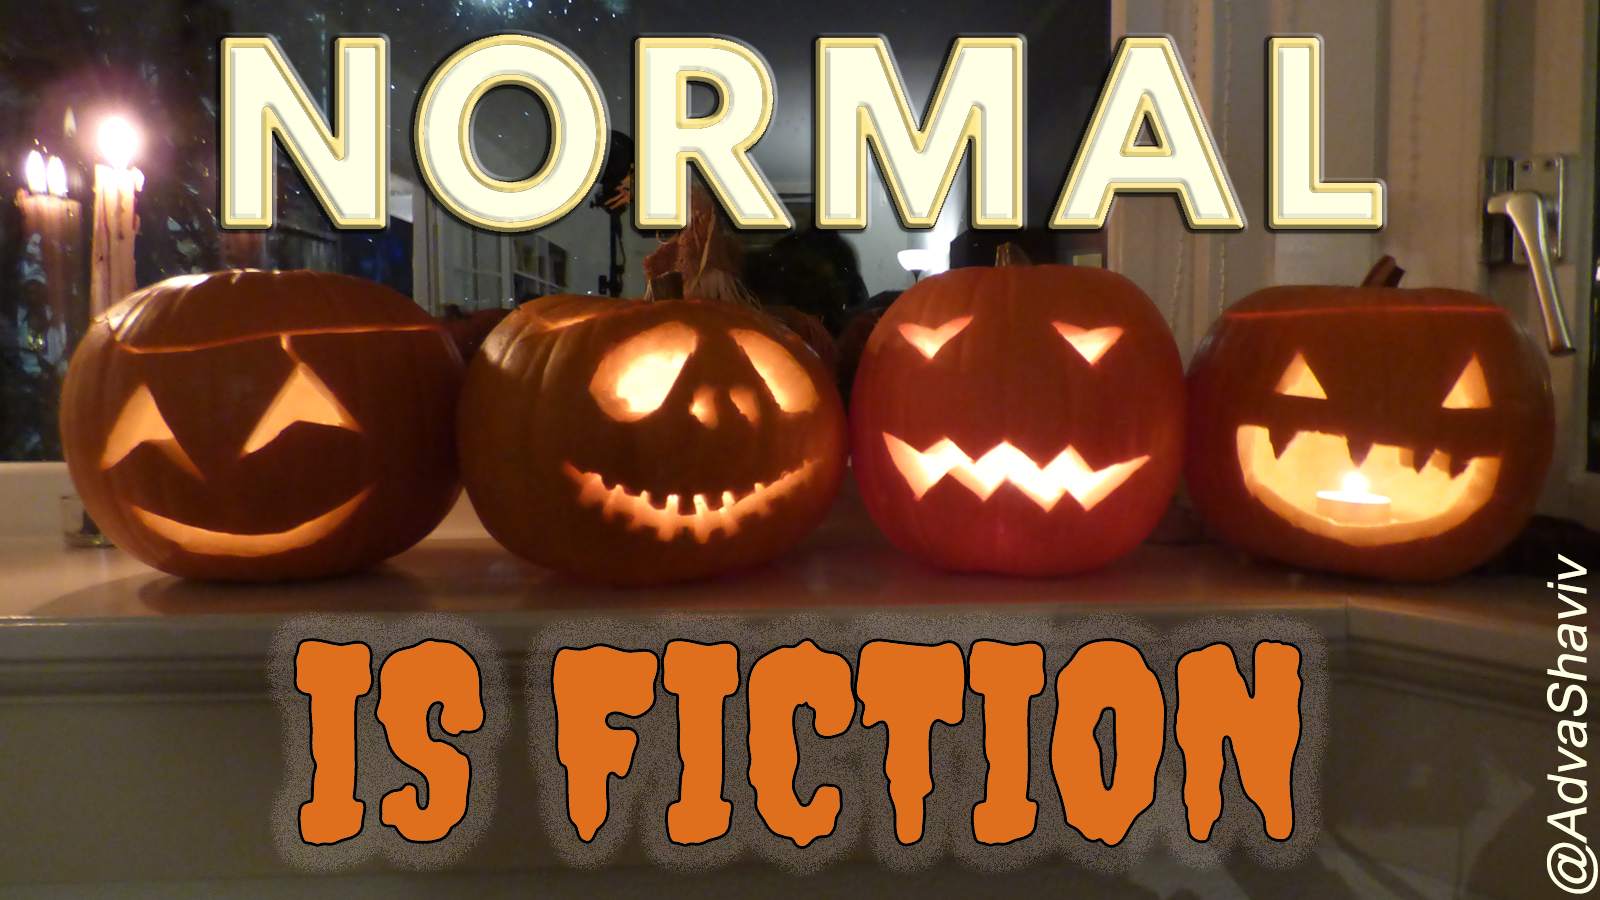 A window decorated for Halloween with four carved pumpkins and the text: Normal is fiction.